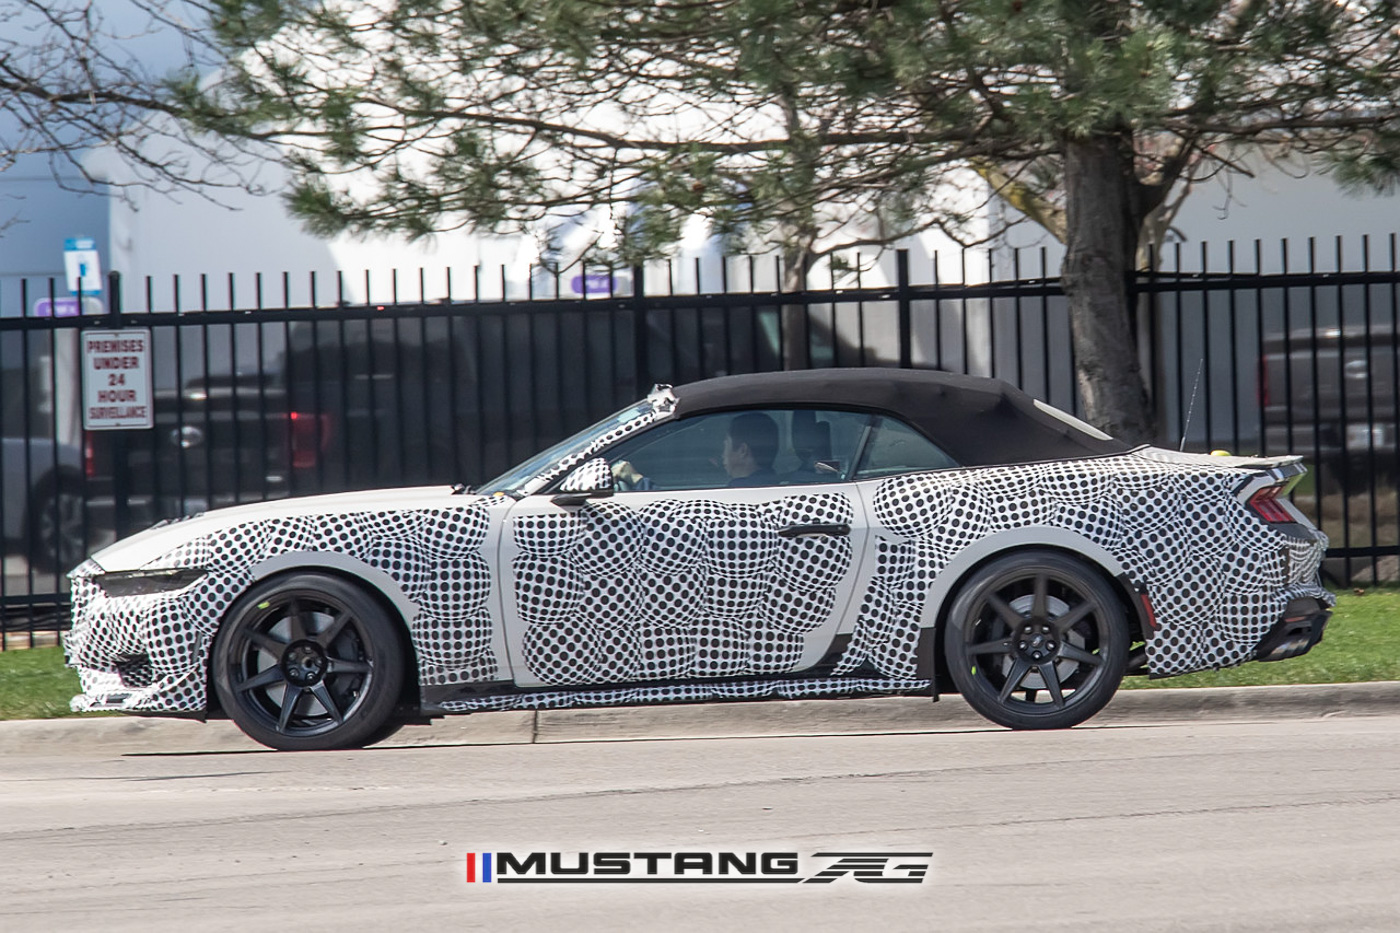 S650 Mustang Speculations for Models Between Dark Horse and GTD? Shelby GT500 3